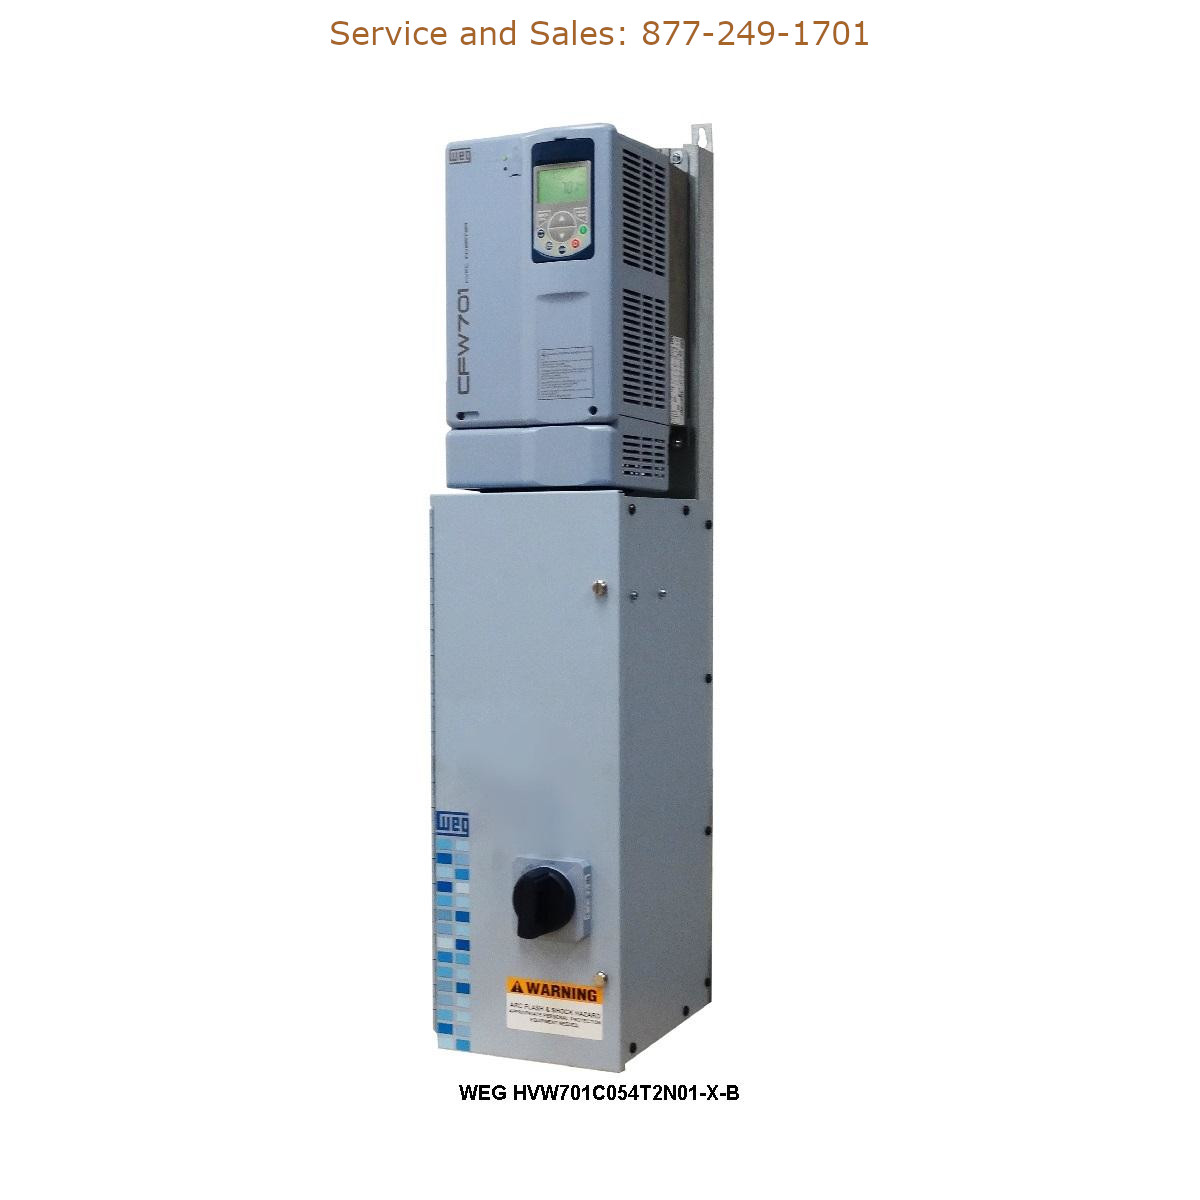 WEG HVW701C054T2N01-X-B WEG Model Number HVW701C054T2N01-X-B WEG Drives, Variable Speed Drives Repair Service, Troubleshooting, Replacement Parts https://gesrepair.com/wp-content/uploads/2022/WEG/WEG_HVW701C054T2N01-X-B_Drives_Variable_Speed_Drives.jpg